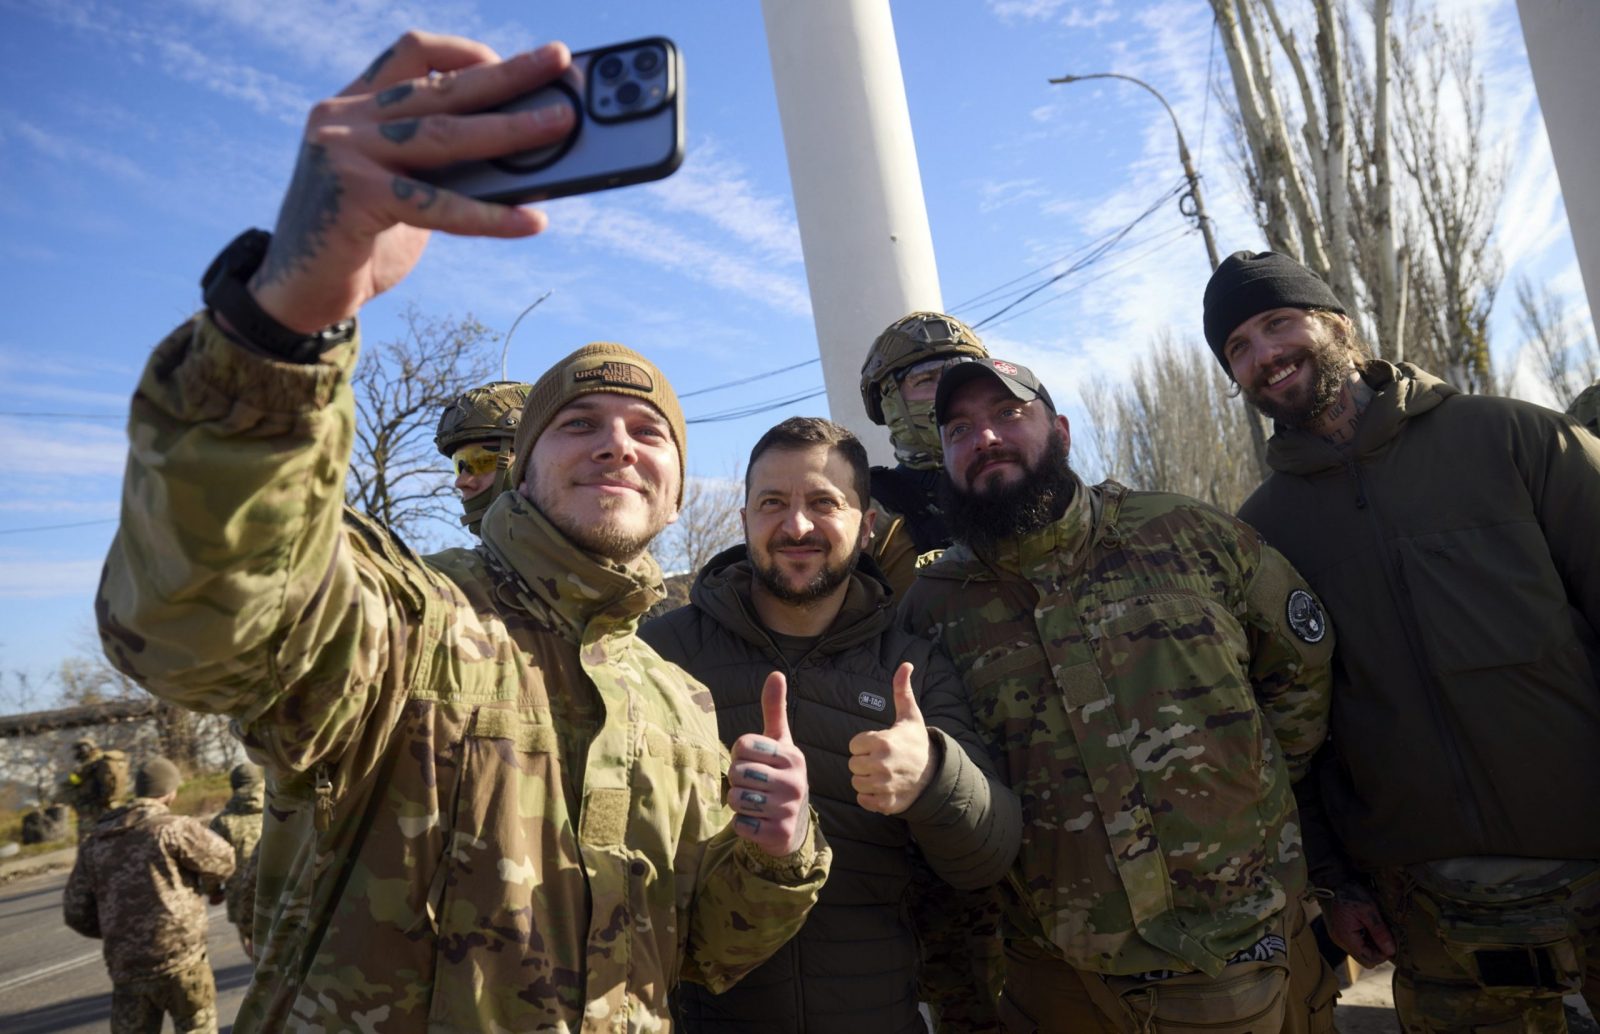 epa10305358 A handout photo made available by the Ukrainian presidential press service shows Ukrainian President Volodymyr Zelensky (C) posing for a selfie with servicemen as he visits the recaptured city of Kherson, Ukraine, 14 November 2022. Ukrainian troops entered Kherson on 11 November after Russian troops had withdrawn from the city. Kherson was captured in the early stage of the conflict, shortly after Russian troops had entered Ukraine in February 2022.  EPA/UKRAINE PRESIDENTIAL PRESS SERVICE HANDOUT HANDOUT HANDOUT EDITORIAL USE ONLY/NO SALES